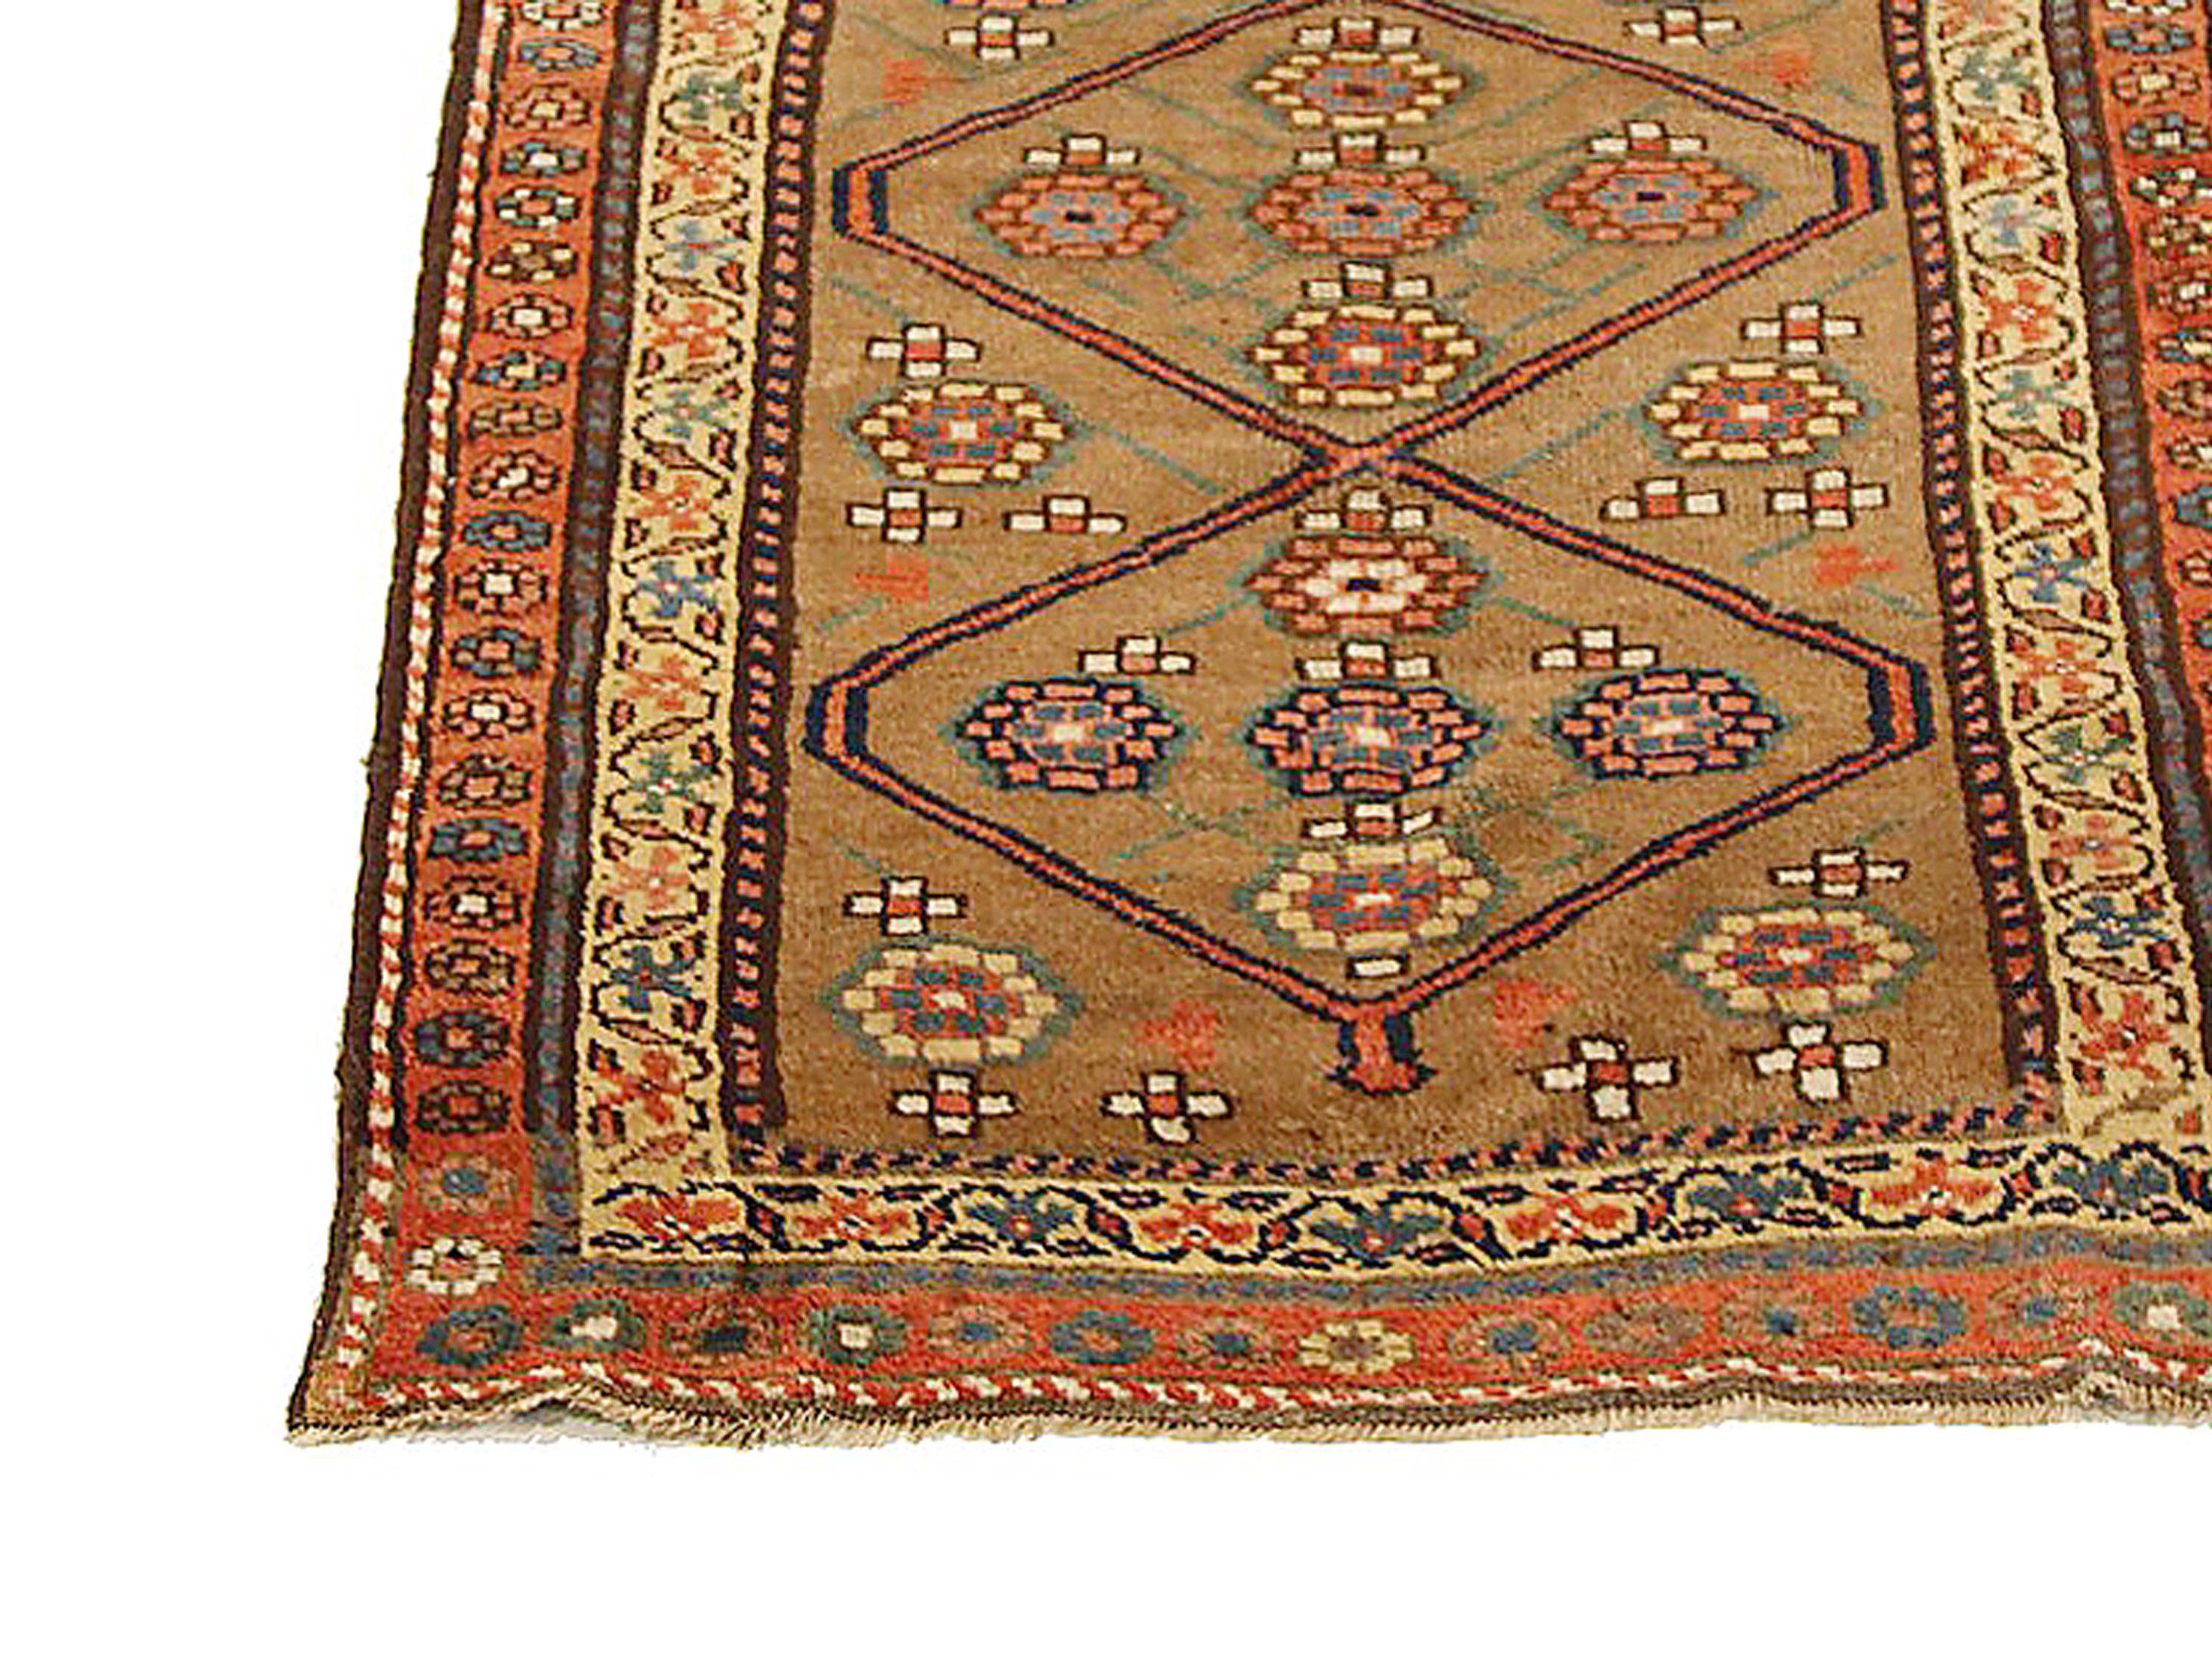 Antique Persian runner rug handwoven from the finest sheep’s wool and colored with all-natural vegetable dyes that are safe for humans and pets. It’s a traditional Bijar design featuring orange and yellow flower medallion details over a beige and